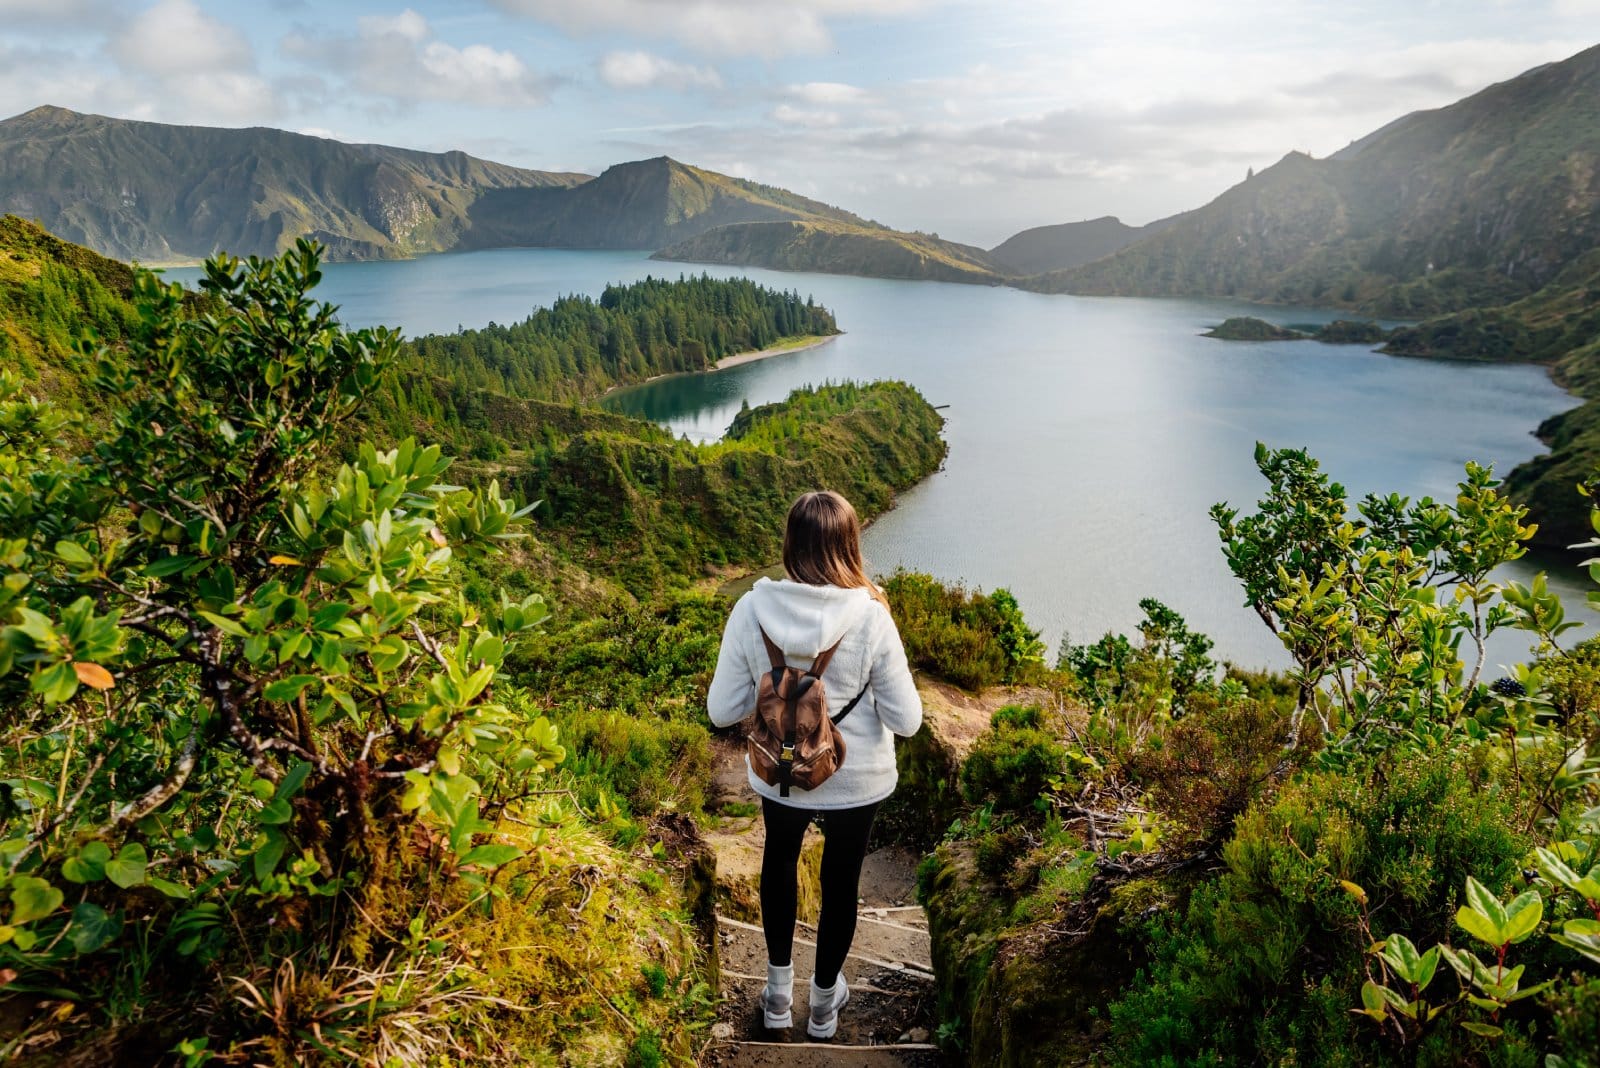 Image Credit: Shutterstock / Damian Lugowski <p>These islands are a hidden gem for eco-tourists, with geothermal energy, sustainable farming, and marine conservation. The Azores offer an affordable European getaway with a low environmental impact.</p>